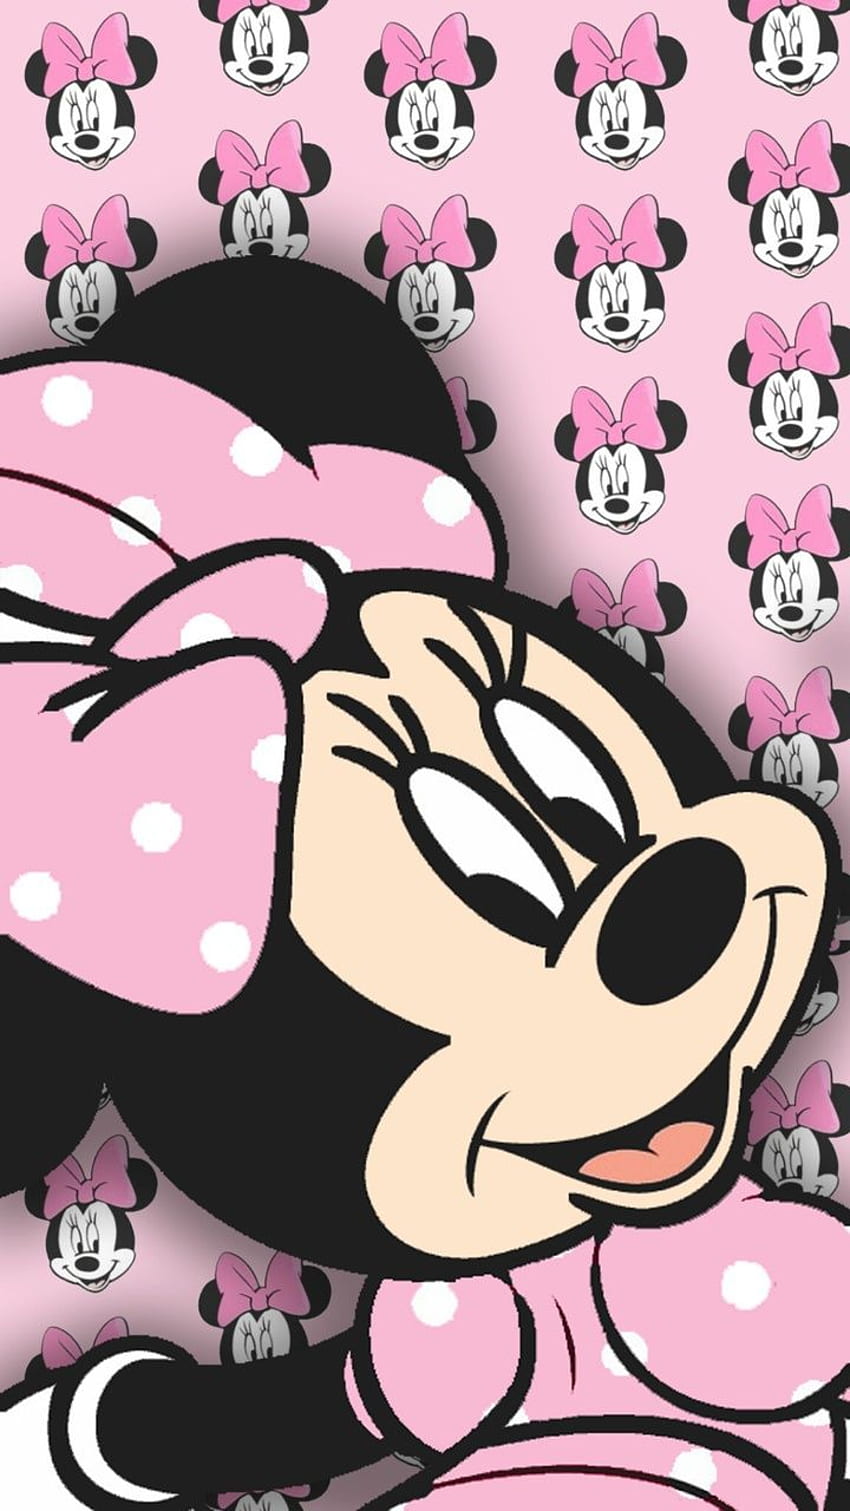 Minnie Mouse wallpaper  Mickey mouse wallpaper Minnie mouse images  Disney wallpaper